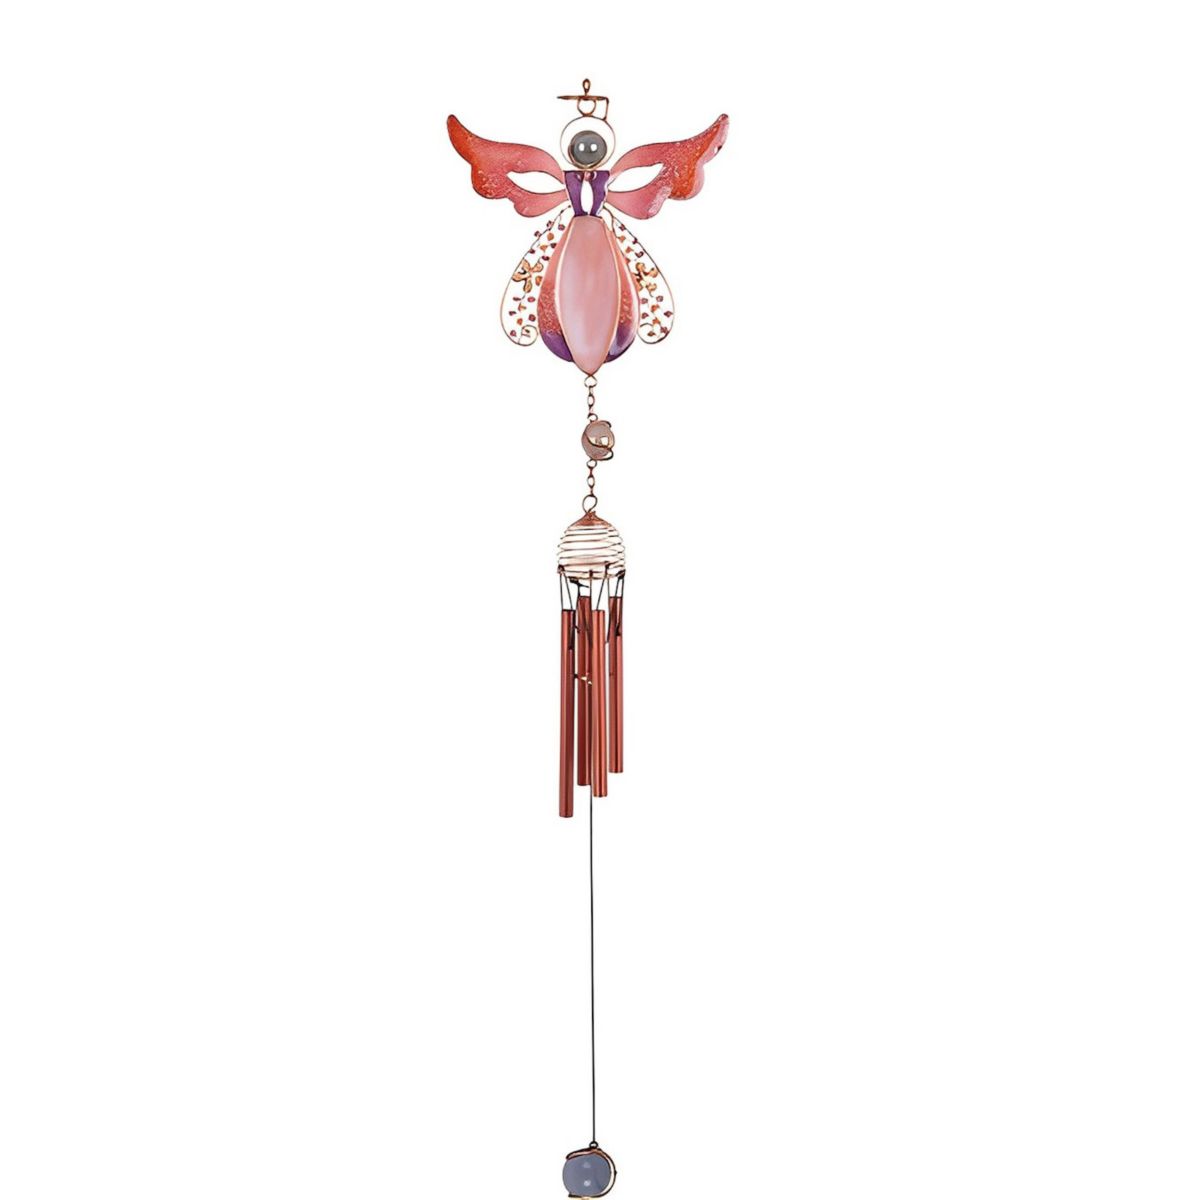 FC Design 27" Long Pink Angel Gem Wind Chime Garden Patio Decoration Perfect Gifts for Holiday F.C Design